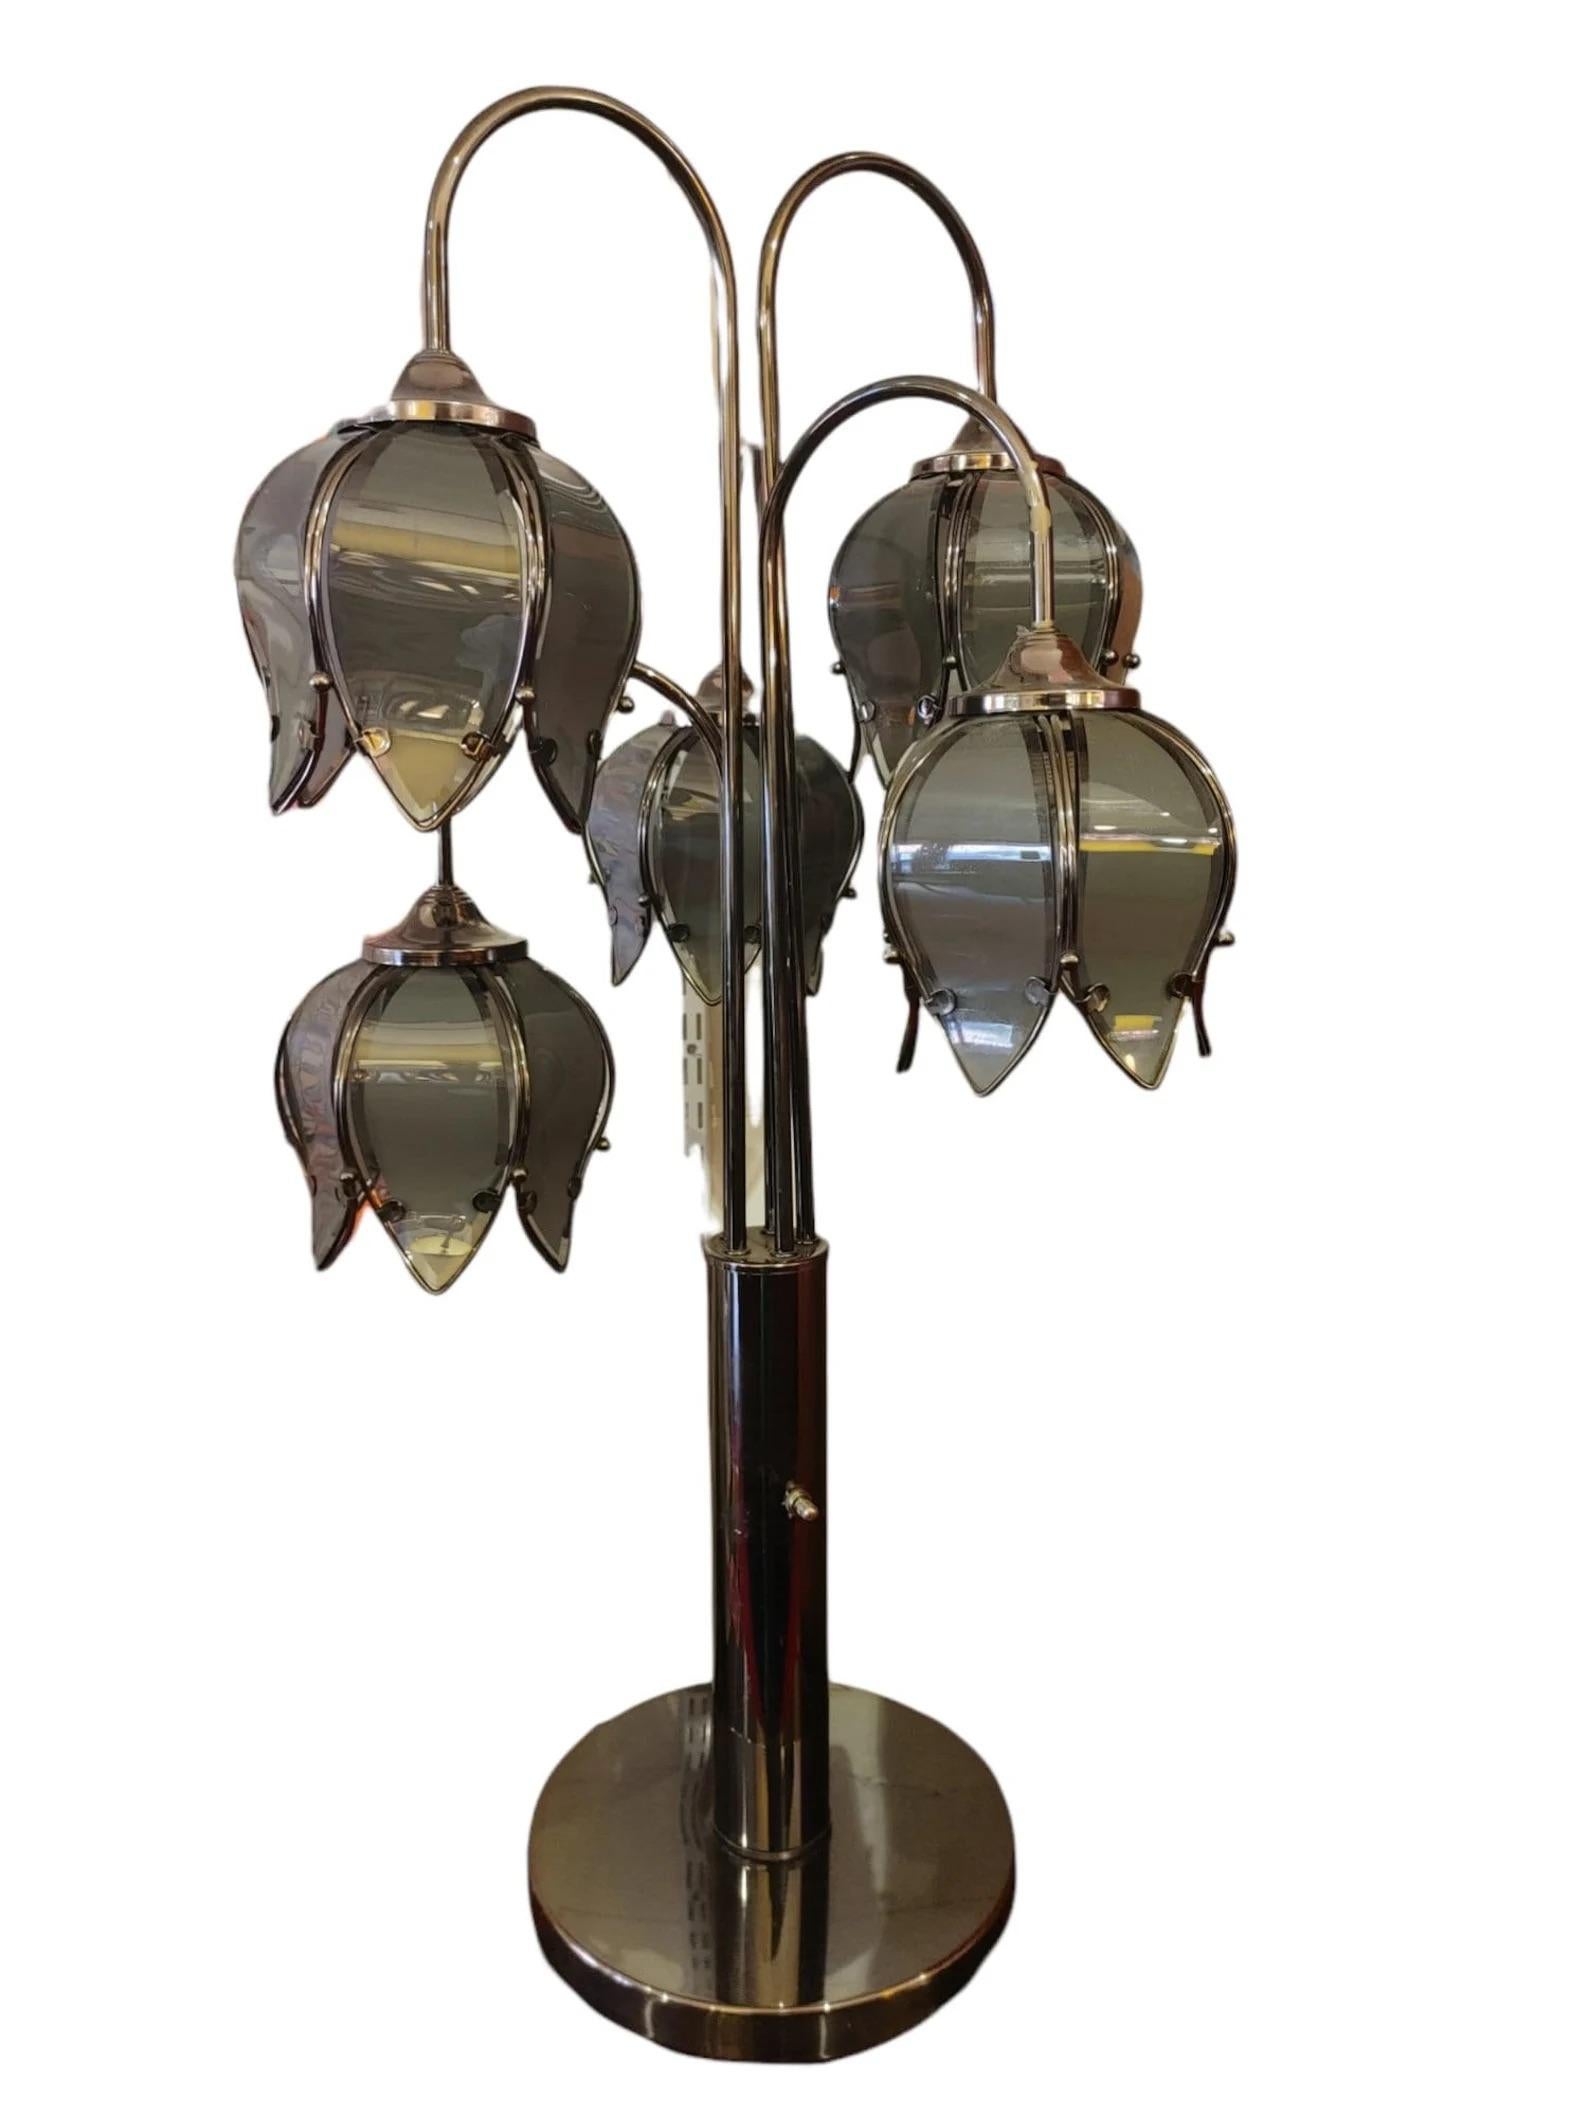 Mid-Century Modern 5 Arm Lotus Lamp 1970s
Base and arms are a black polished chrome
Lotus shades are glass petal design in smoky gray and blue hues
Light switch are three-way so that two bulbs light up at each turn and then finally all are lit up